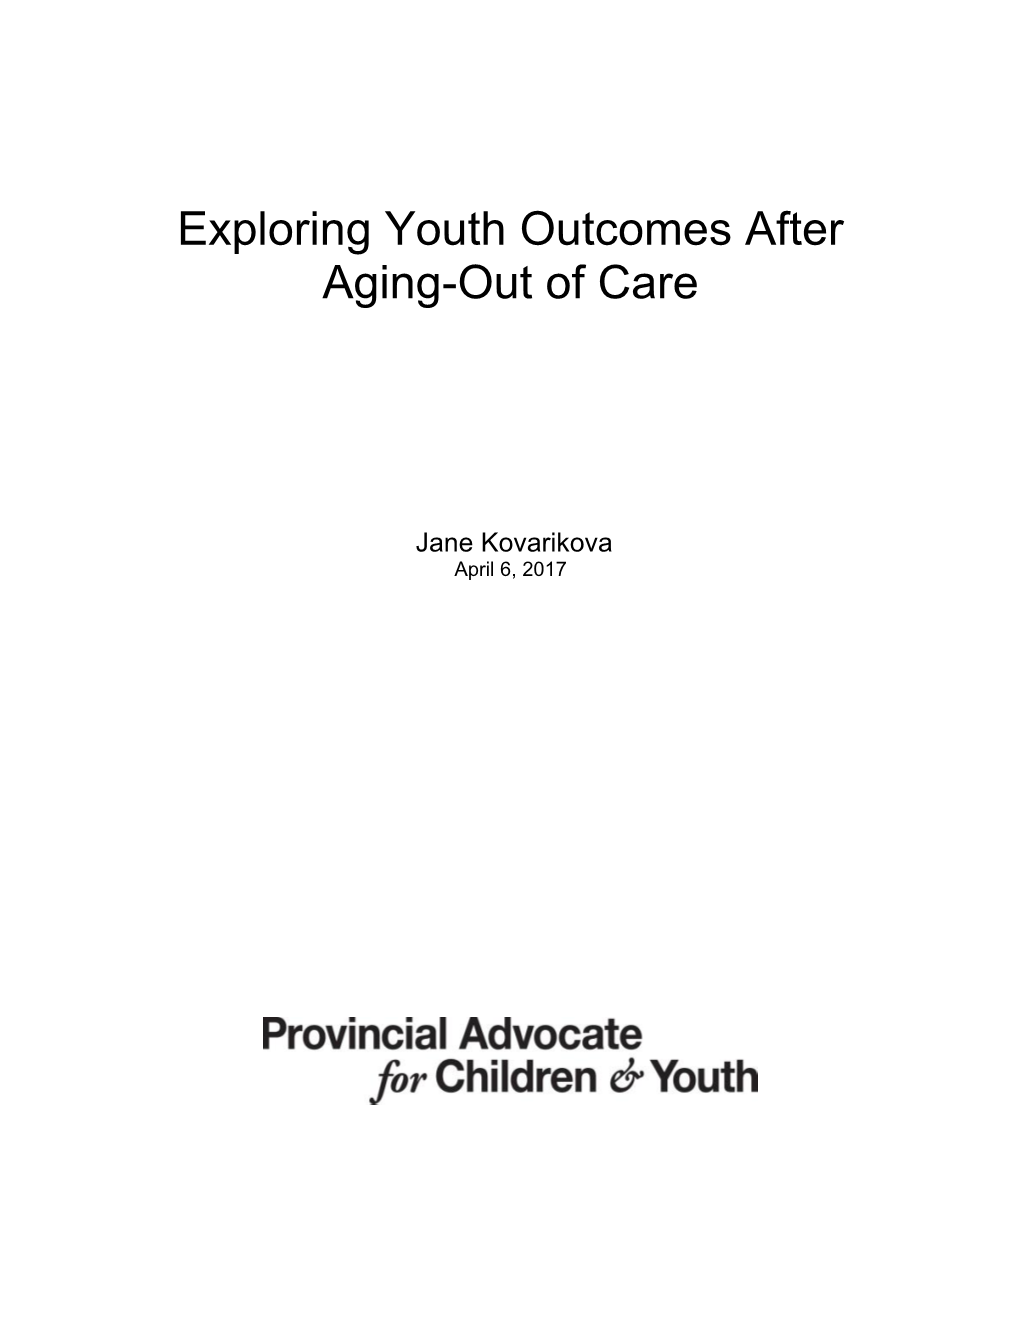 Exploring Youth Outcomes After Aging-Out of Care